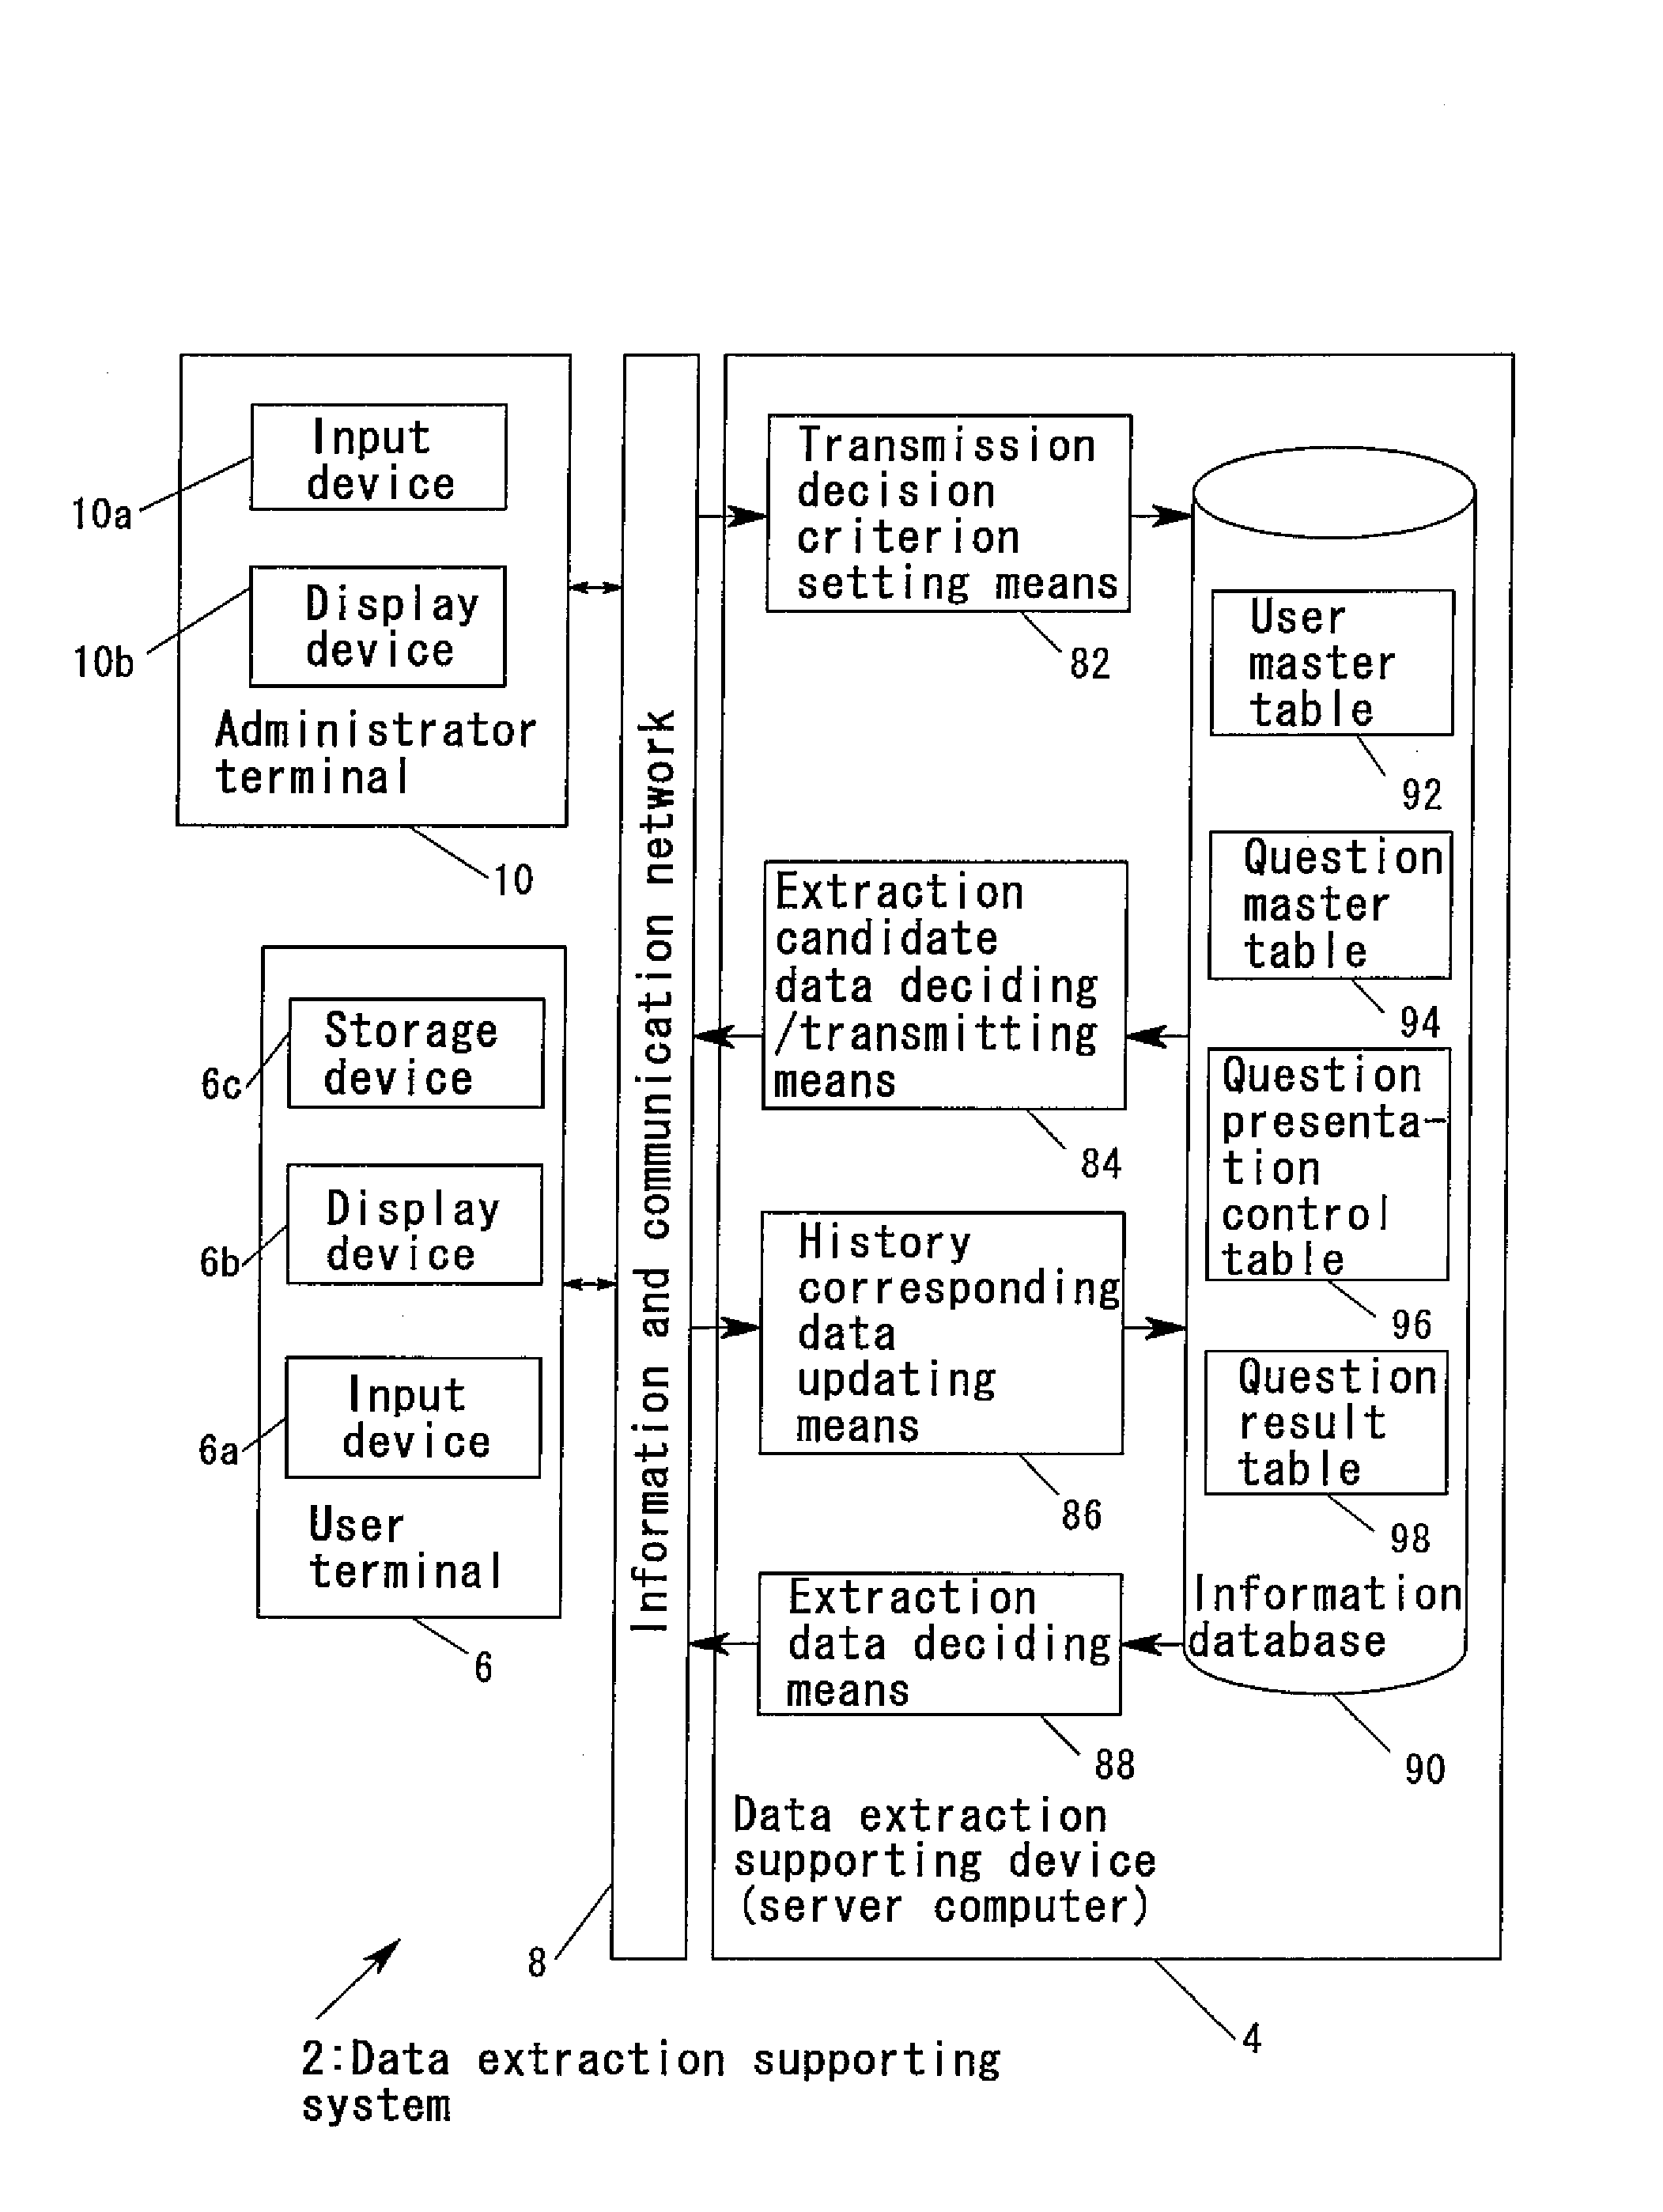 Data Extraction Supporting System